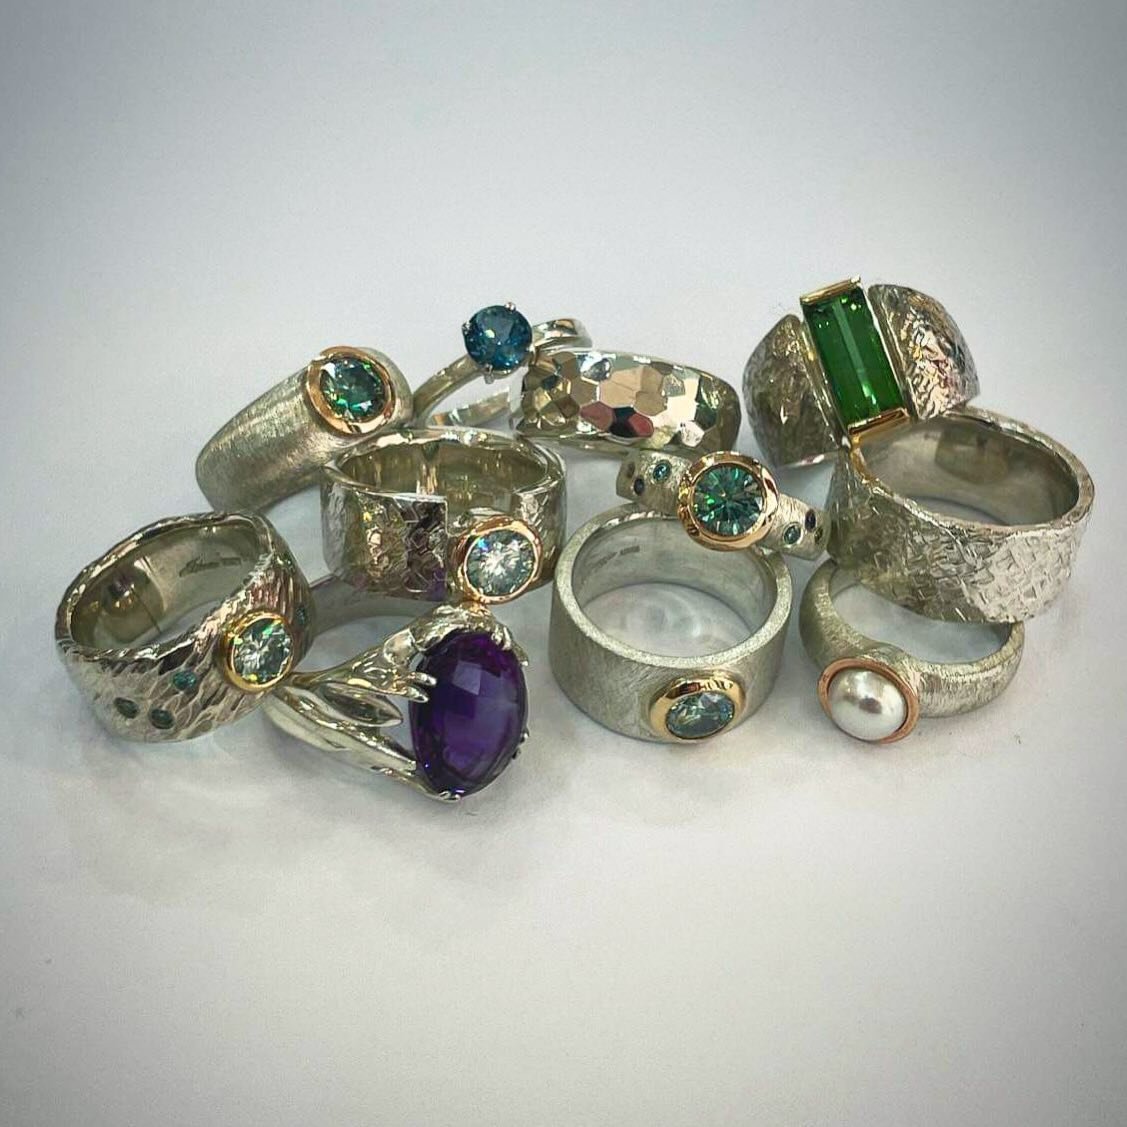 So many stunning textured rings in store by @jewellerybyidour right now! Which one is your favourite?! 💍 
.
.
.
#jewellery #nzjewellery #rings #textured #accessories #design #dunedin #nzmade #shoplocal